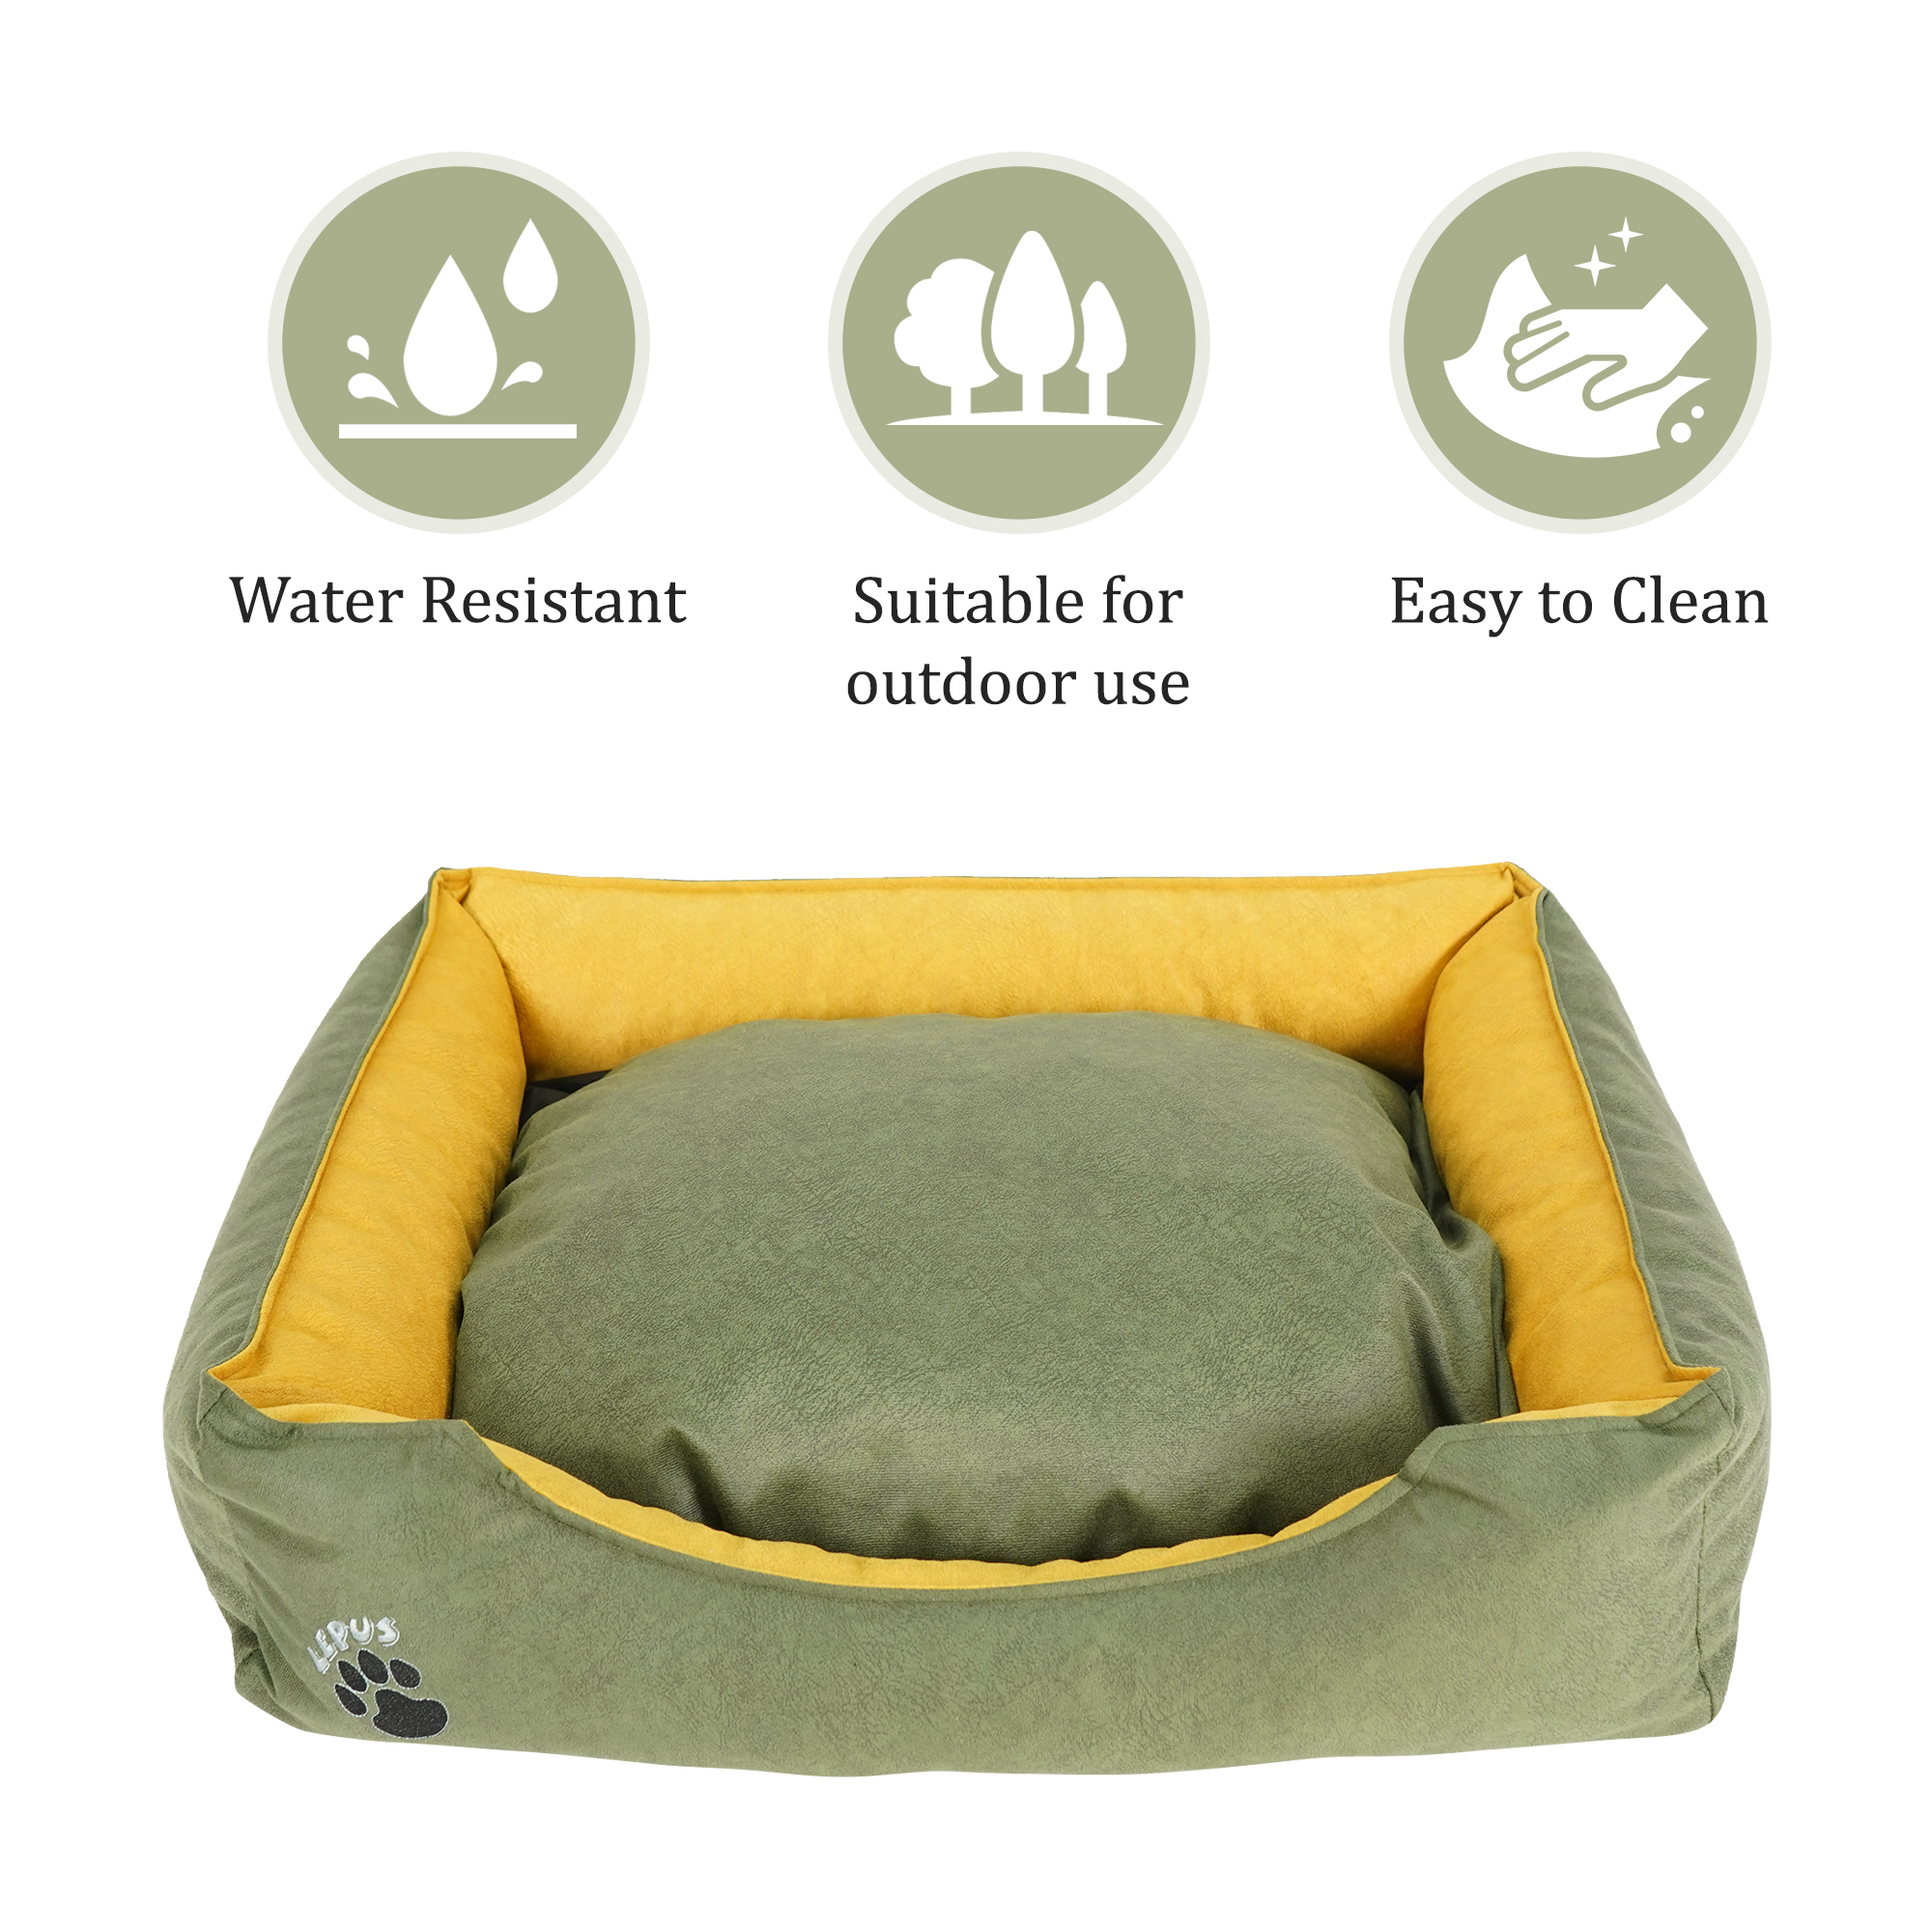 SUSSEXHOME Pets 23.5 x 17.3 x 7 Inches Washable Dog Bed for Medium Dogs - Durable Waterproof Sofa Dog Bed with Sides - (GREEN) - image 5 of 7